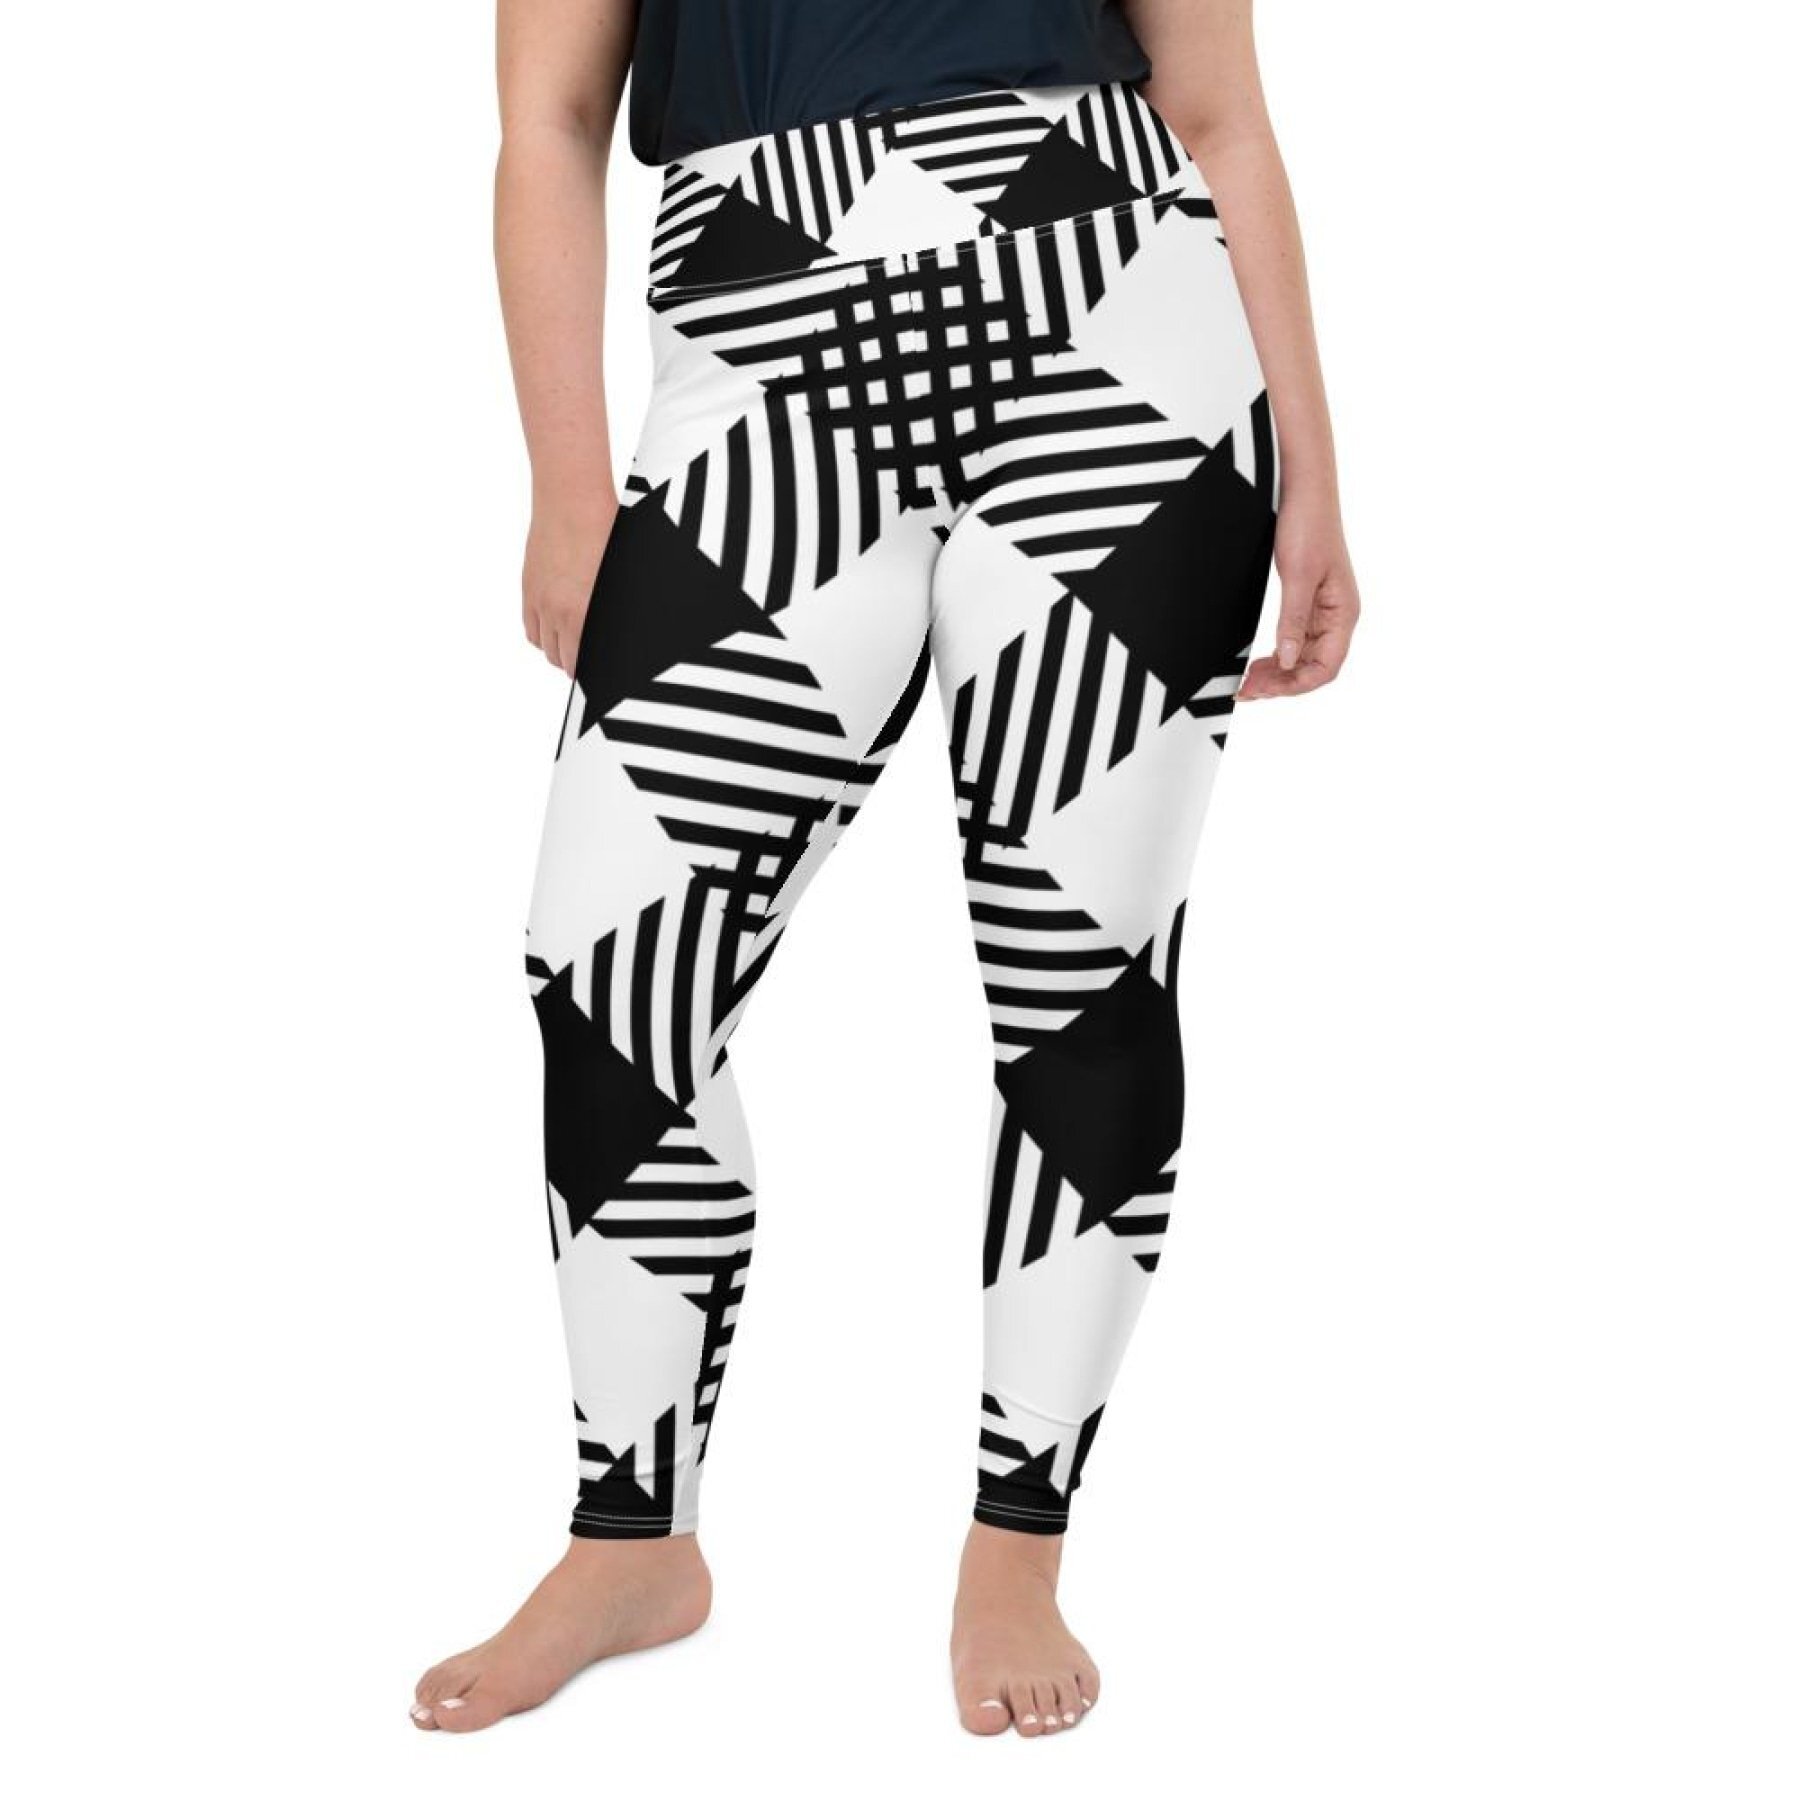 Womens Athletic Pants, Black And White Plaid Style Plus Size High